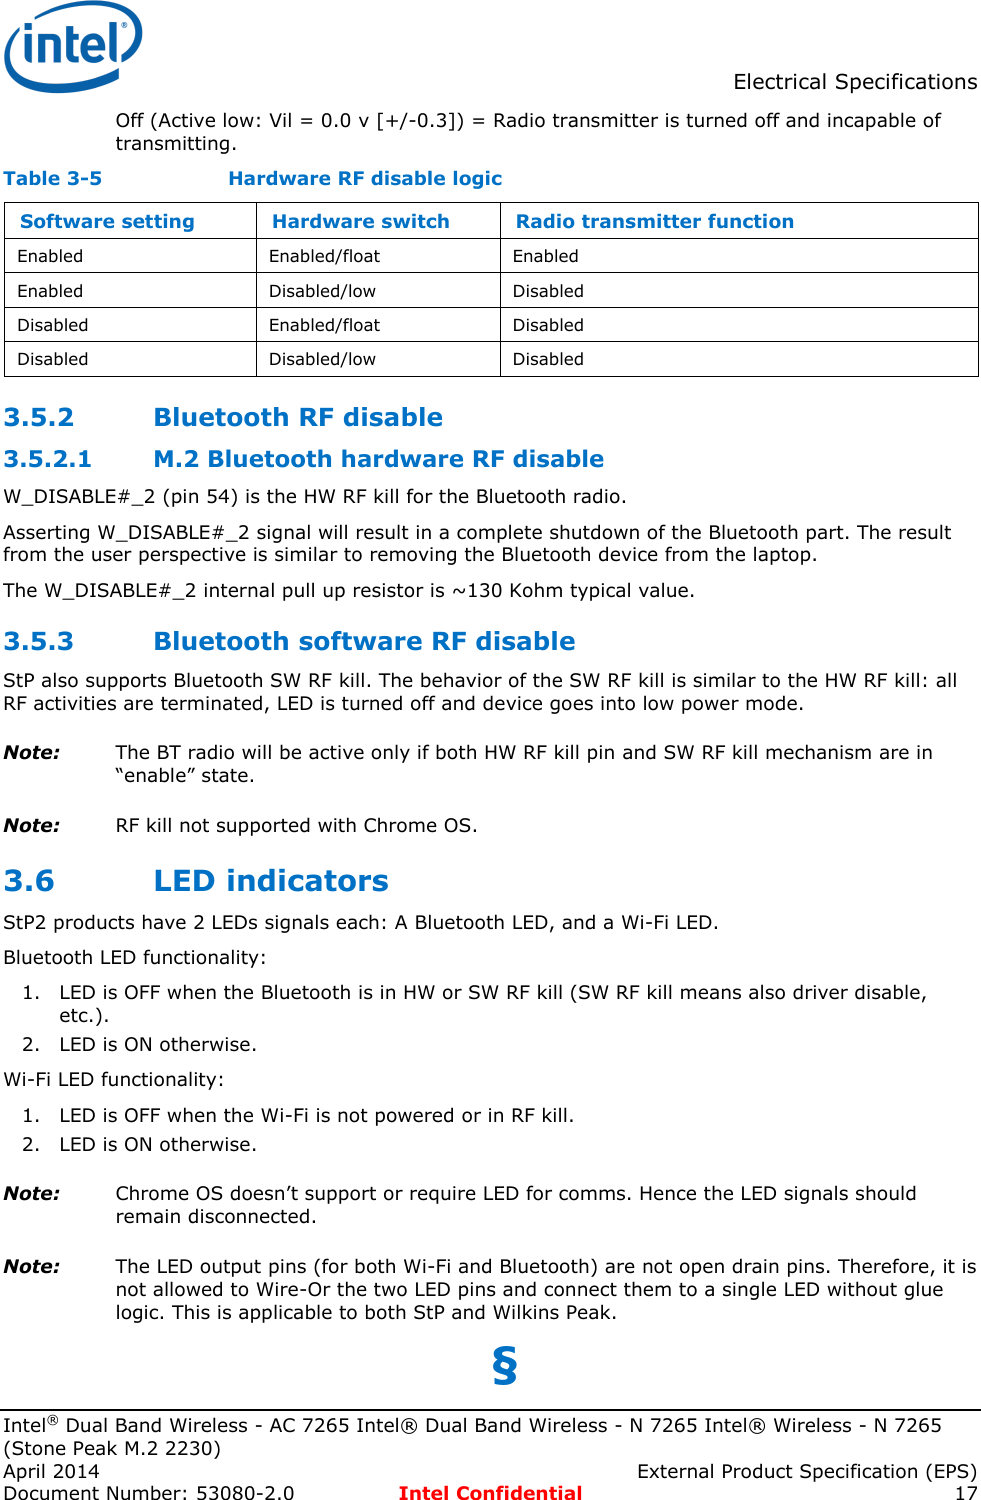  Electrical Specifications  Intel® Dual Band Wireless - AC 7265 Intel® Dual Band Wireless - N 7265 Intel® Wireless - N 7265 (Stone Peak M.2 2230) April 2014    External Product Specification (EPS) Document Number: 53080-2.0  Intel Confidential 17   Off (Active low: Vil = 0.0 v [+/-0.3]) = Radio transmitter is turned off and incapable of transmitting.  Table 3-5    Hardware RF disable logic Software setting Hardware switch Radio transmitter function Enabled Enabled/float Enabled Enabled Disabled/low Disabled Disabled Enabled/float Disabled Disabled Disabled/low Disabled 3.5.2 Bluetooth RF disable  M.2 Bluetooth hardware RF disable 3.5.2.1W_DISABLE#_2 (pin 54) is the HW RF kill for the Bluetooth radio. Asserting W_DISABLE#_2 signal will result in a complete shutdown of the Bluetooth part. The result from the user perspective is similar to removing the Bluetooth device from the laptop.  The W_DISABLE#_2 internal pull up resistor is ~130 Kohm typical value. 3.5.3 Bluetooth software RF disable StP also supports Bluetooth SW RF kill. The behavior of the SW RF kill is similar to the HW RF kill: all RF activities are terminated, LED is turned off and device goes into low power mode. Note: The BT radio will be active only if both HW RF kill pin and SW RF kill mechanism are in “enable” state. Note: RF kill not supported with Chrome OS. 3.6 LED indicators StP2 products have 2 LEDs signals each: A Bluetooth LED, and a Wi-Fi LED. Bluetooth LED functionality: 1. LED is OFF when the Bluetooth is in HW or SW RF kill (SW RF kill means also driver disable, etc.). 2. LED is ON otherwise.  Wi-Fi LED functionality: 1. LED is OFF when the Wi-Fi is not powered or in RF kill. 2. LED is ON otherwise. Note: Chrome OS doesn’t support or require LED for comms. Hence the LED signals should remain disconnected.  Note: The LED output pins (for both Wi-Fi and Bluetooth) are not open drain pins. Therefore, it is not allowed to Wire-Or the two LED pins and connect them to a single LED without glue logic. This is applicable to both StP and Wilkins Peak. §  